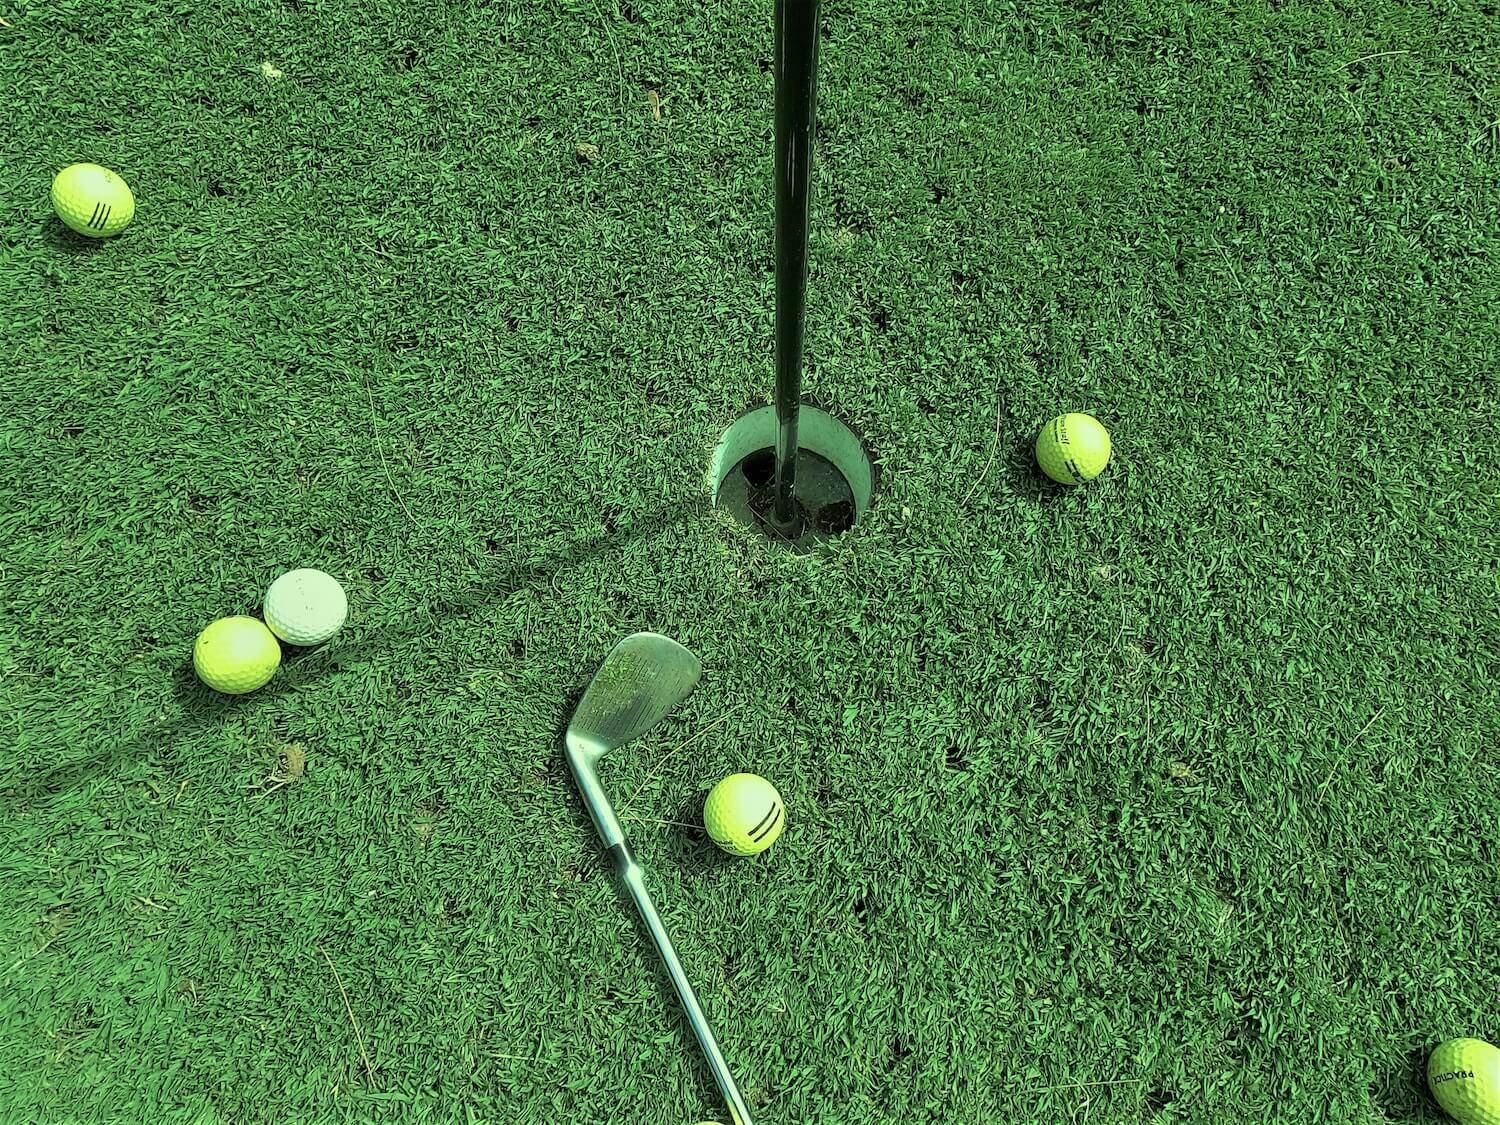 putting green with golf balls